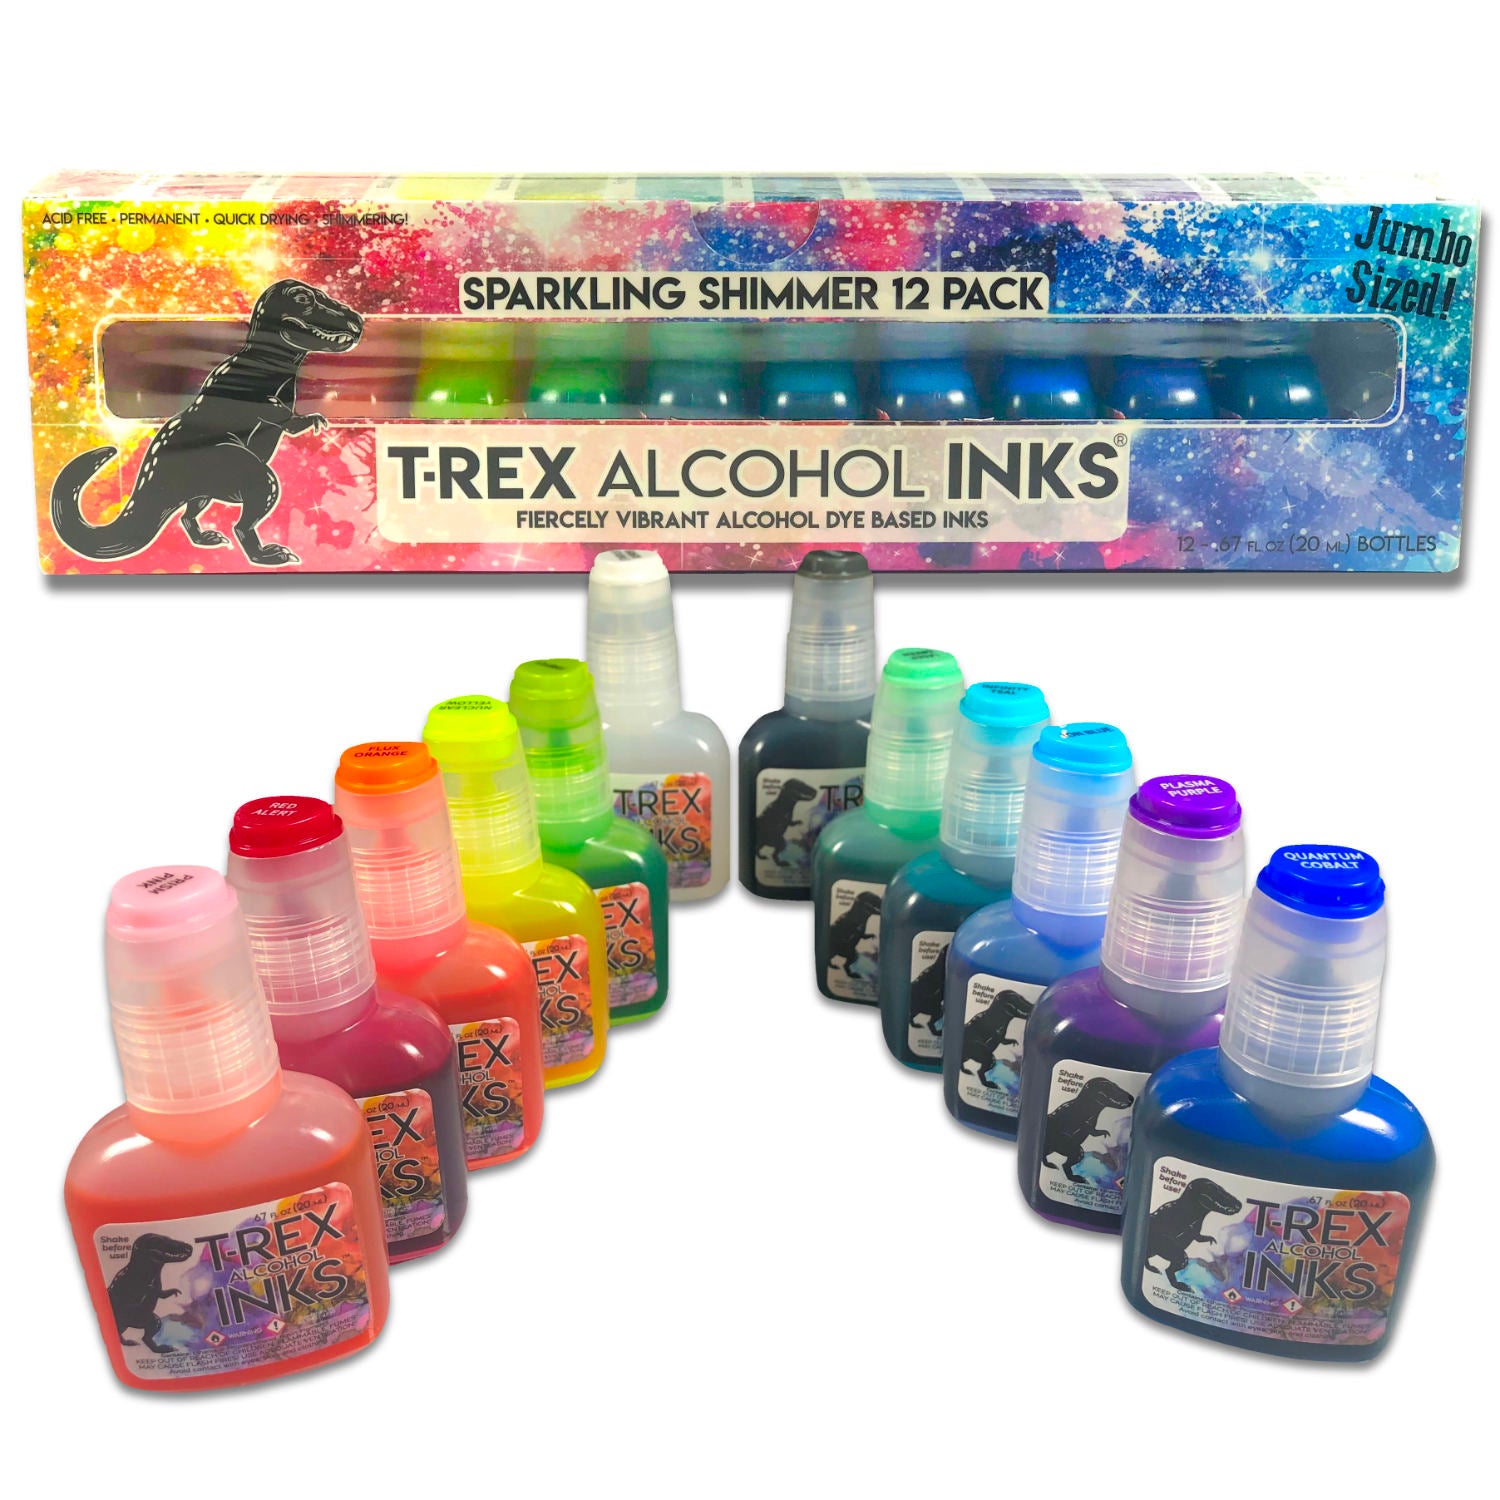 What is Alcohol Ink?